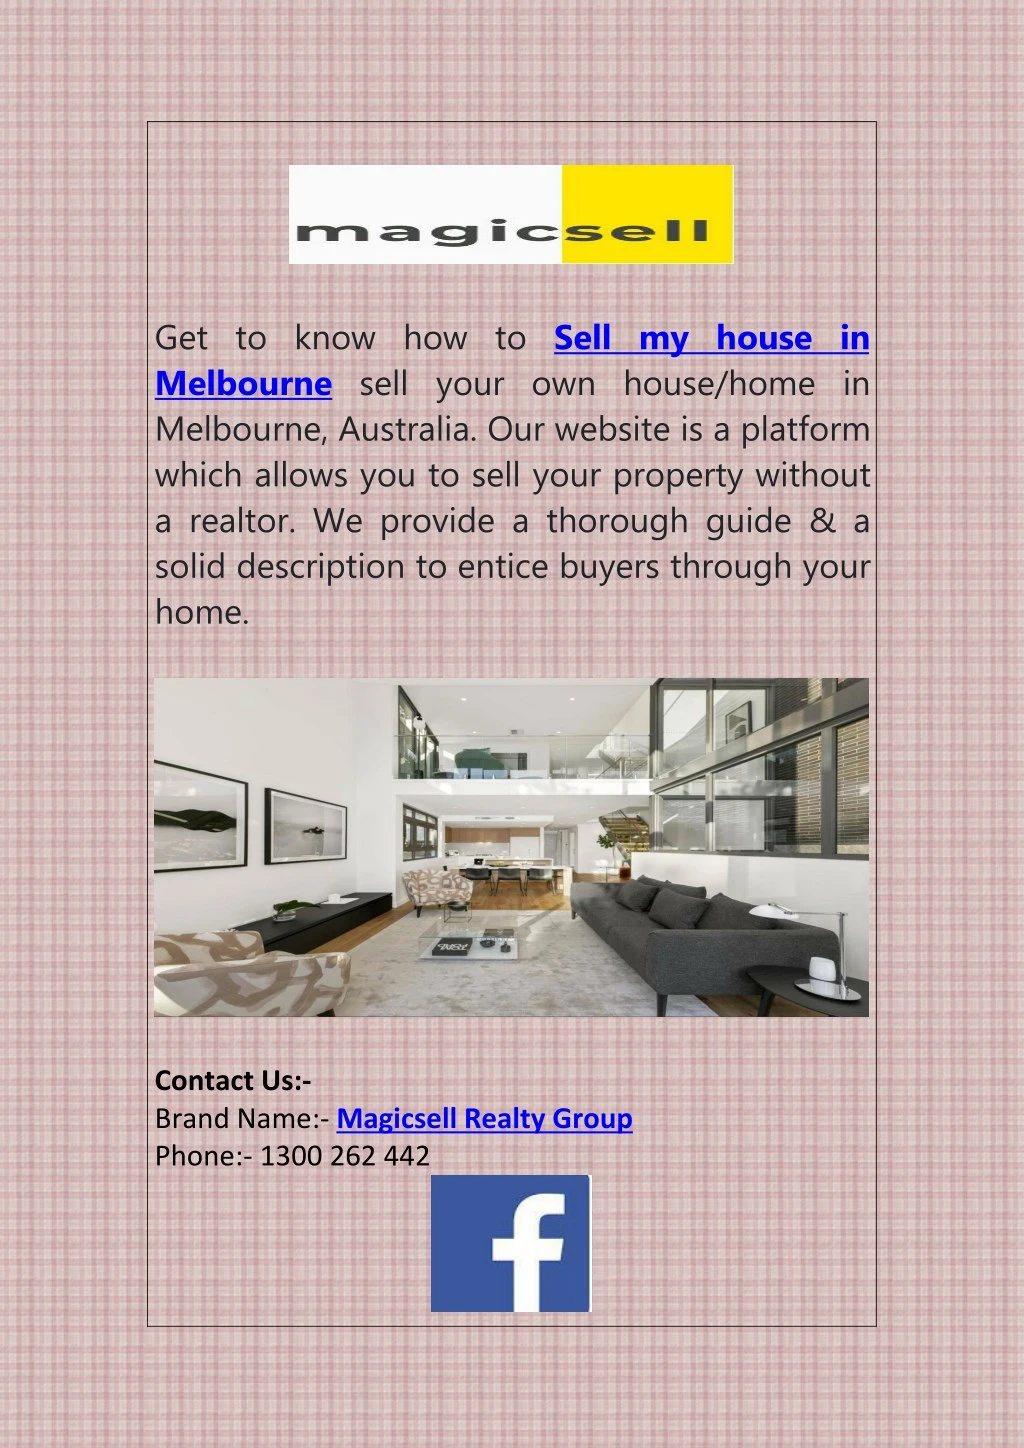 get to know how to sell my house in melbourne